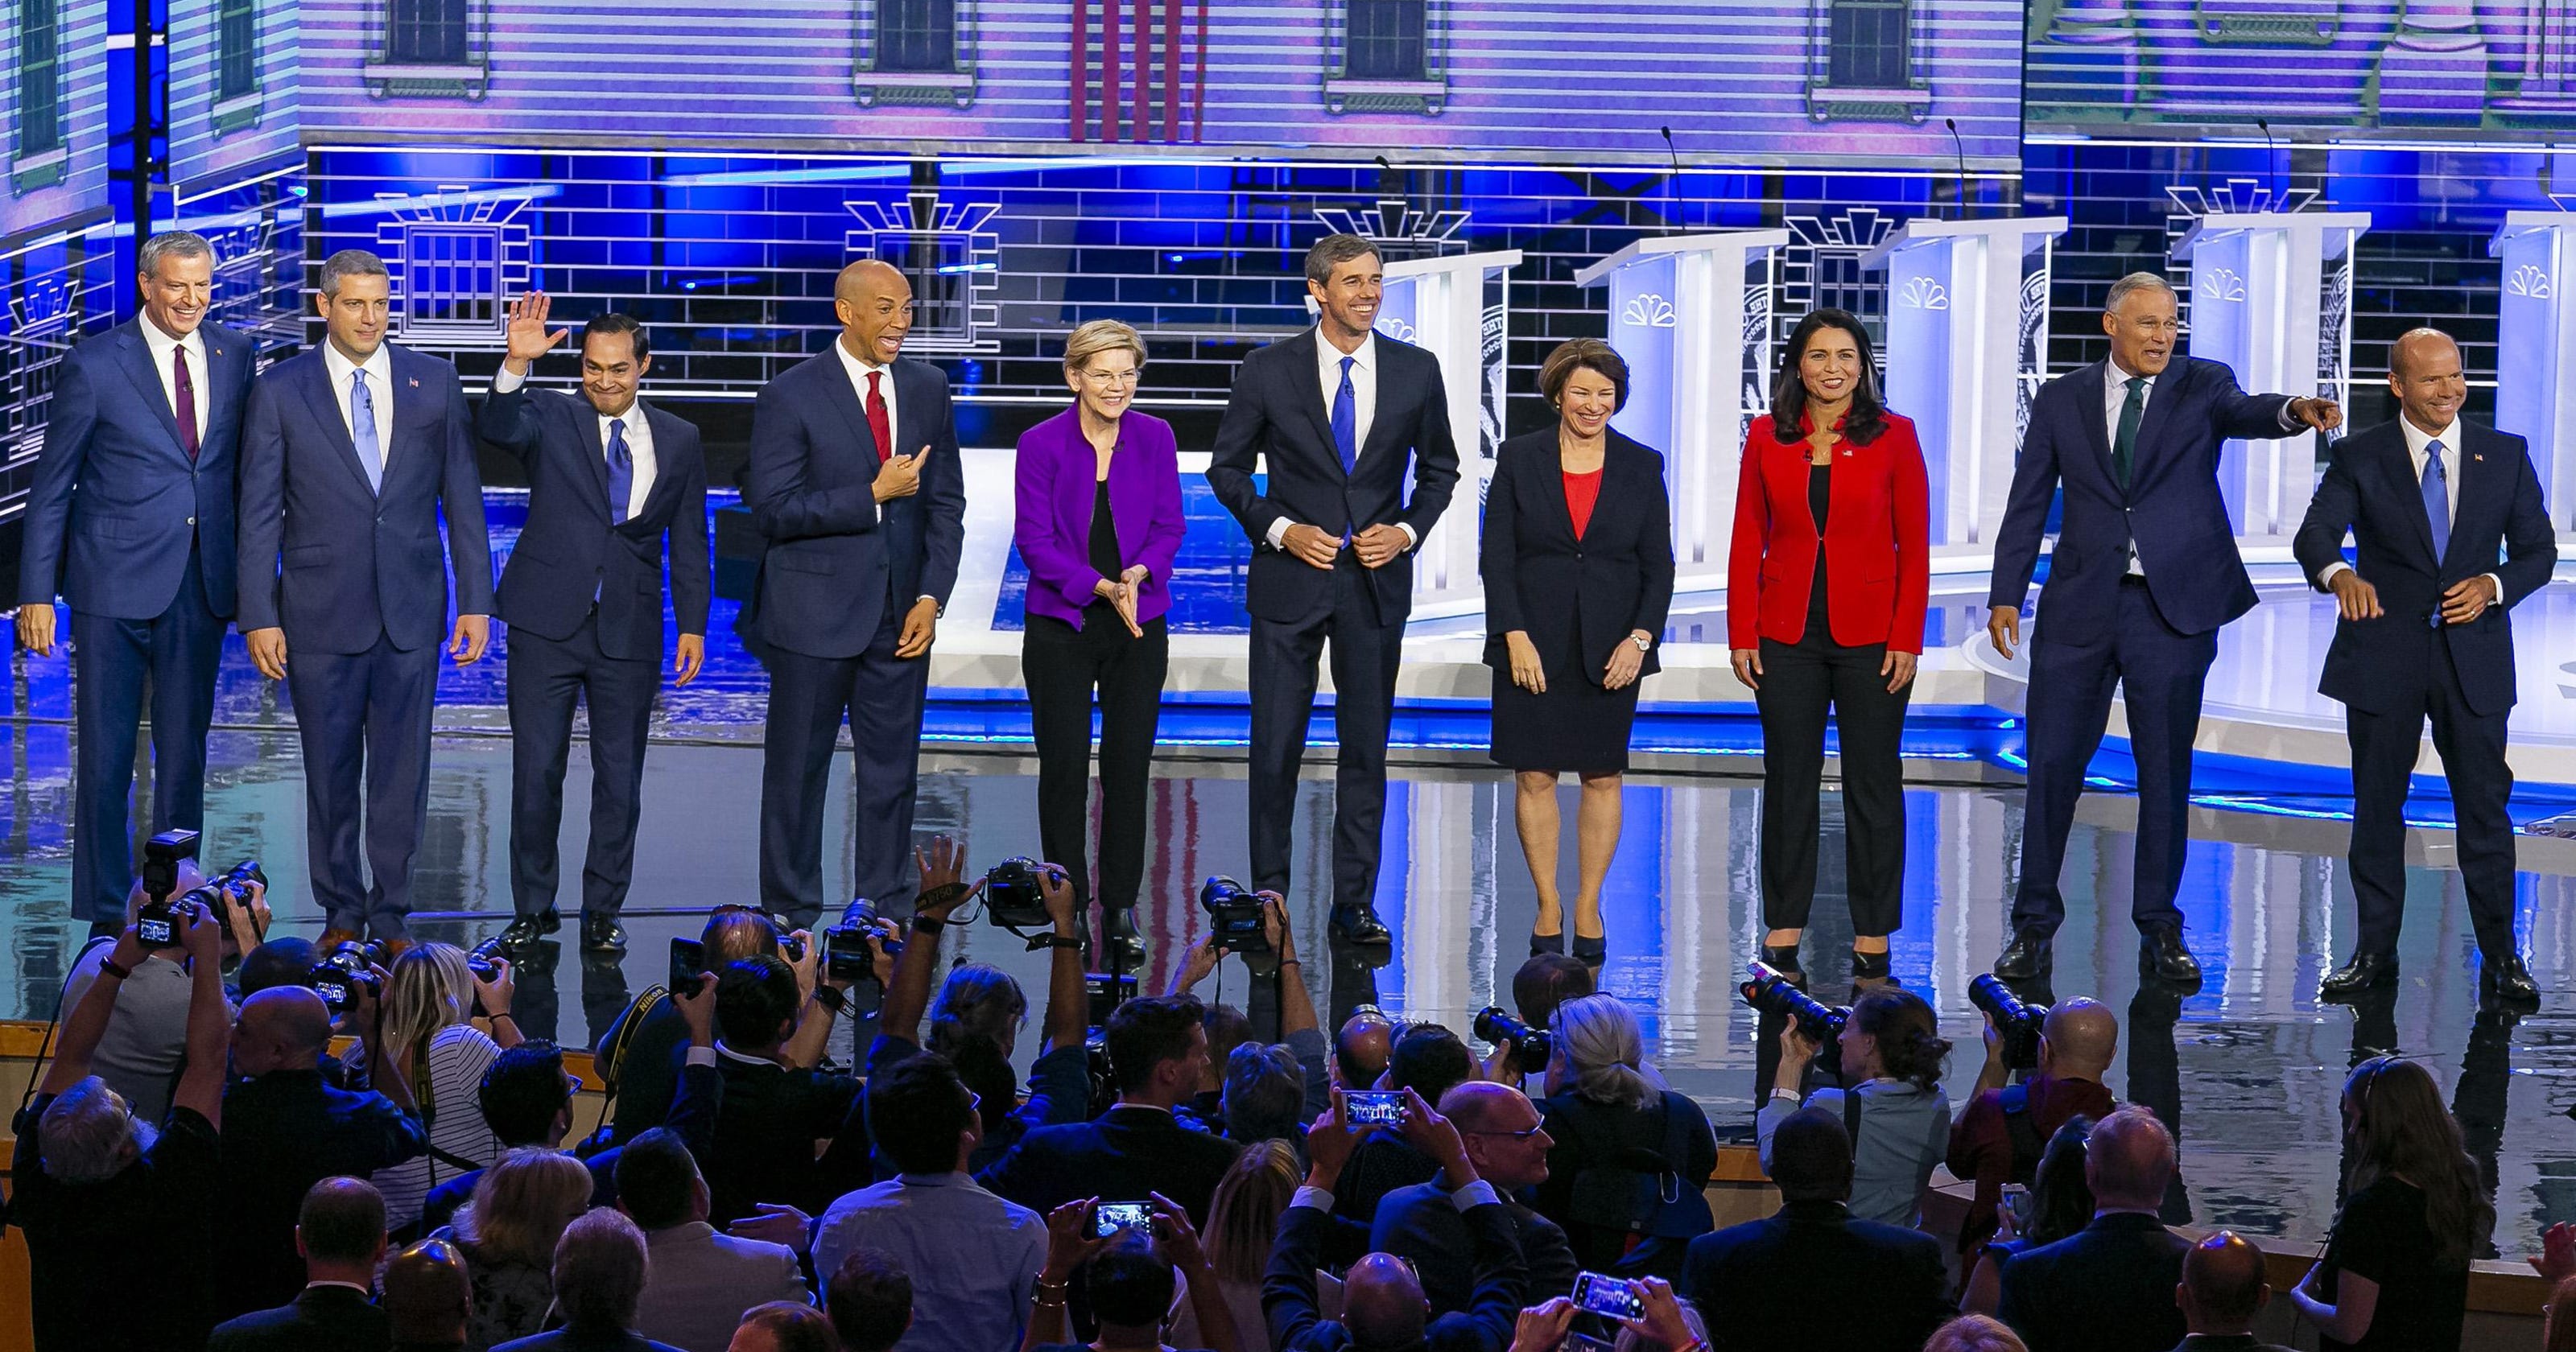 WATCH LIVE: Second group of Democratic presidential candidates debate3200 x 1680